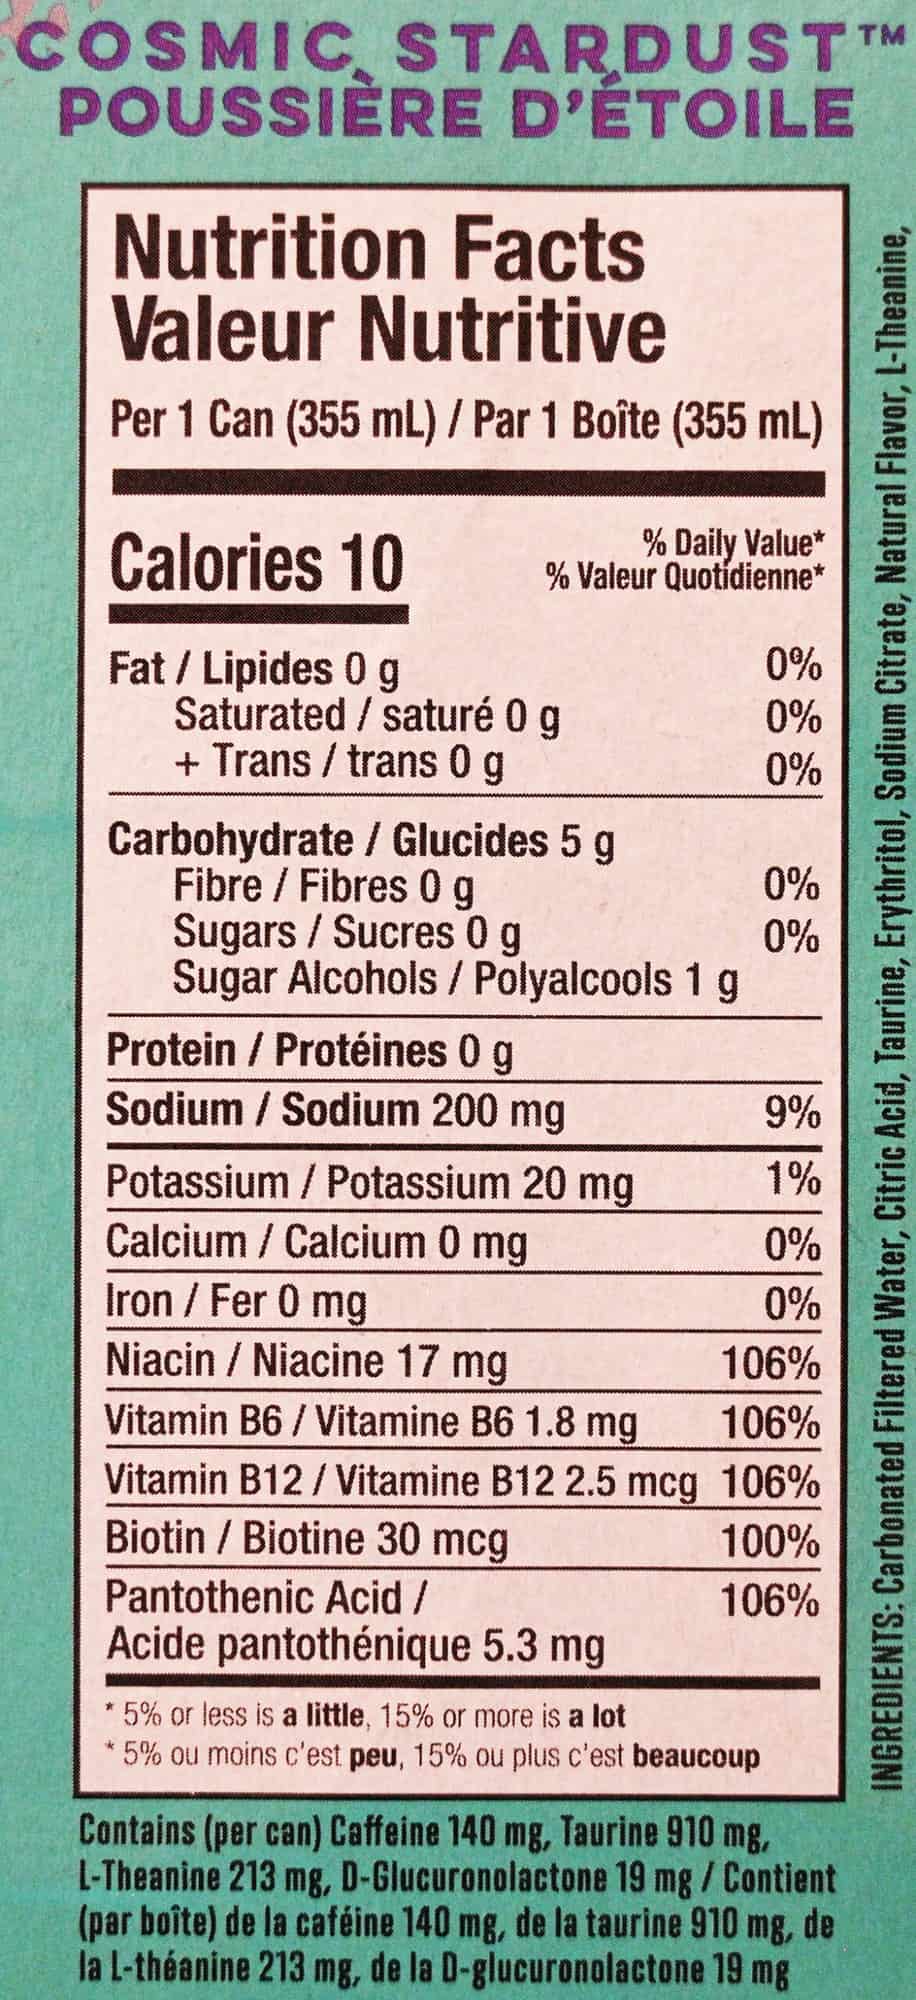 Image of the cosmic stardust nutrition facts from the back of the box.